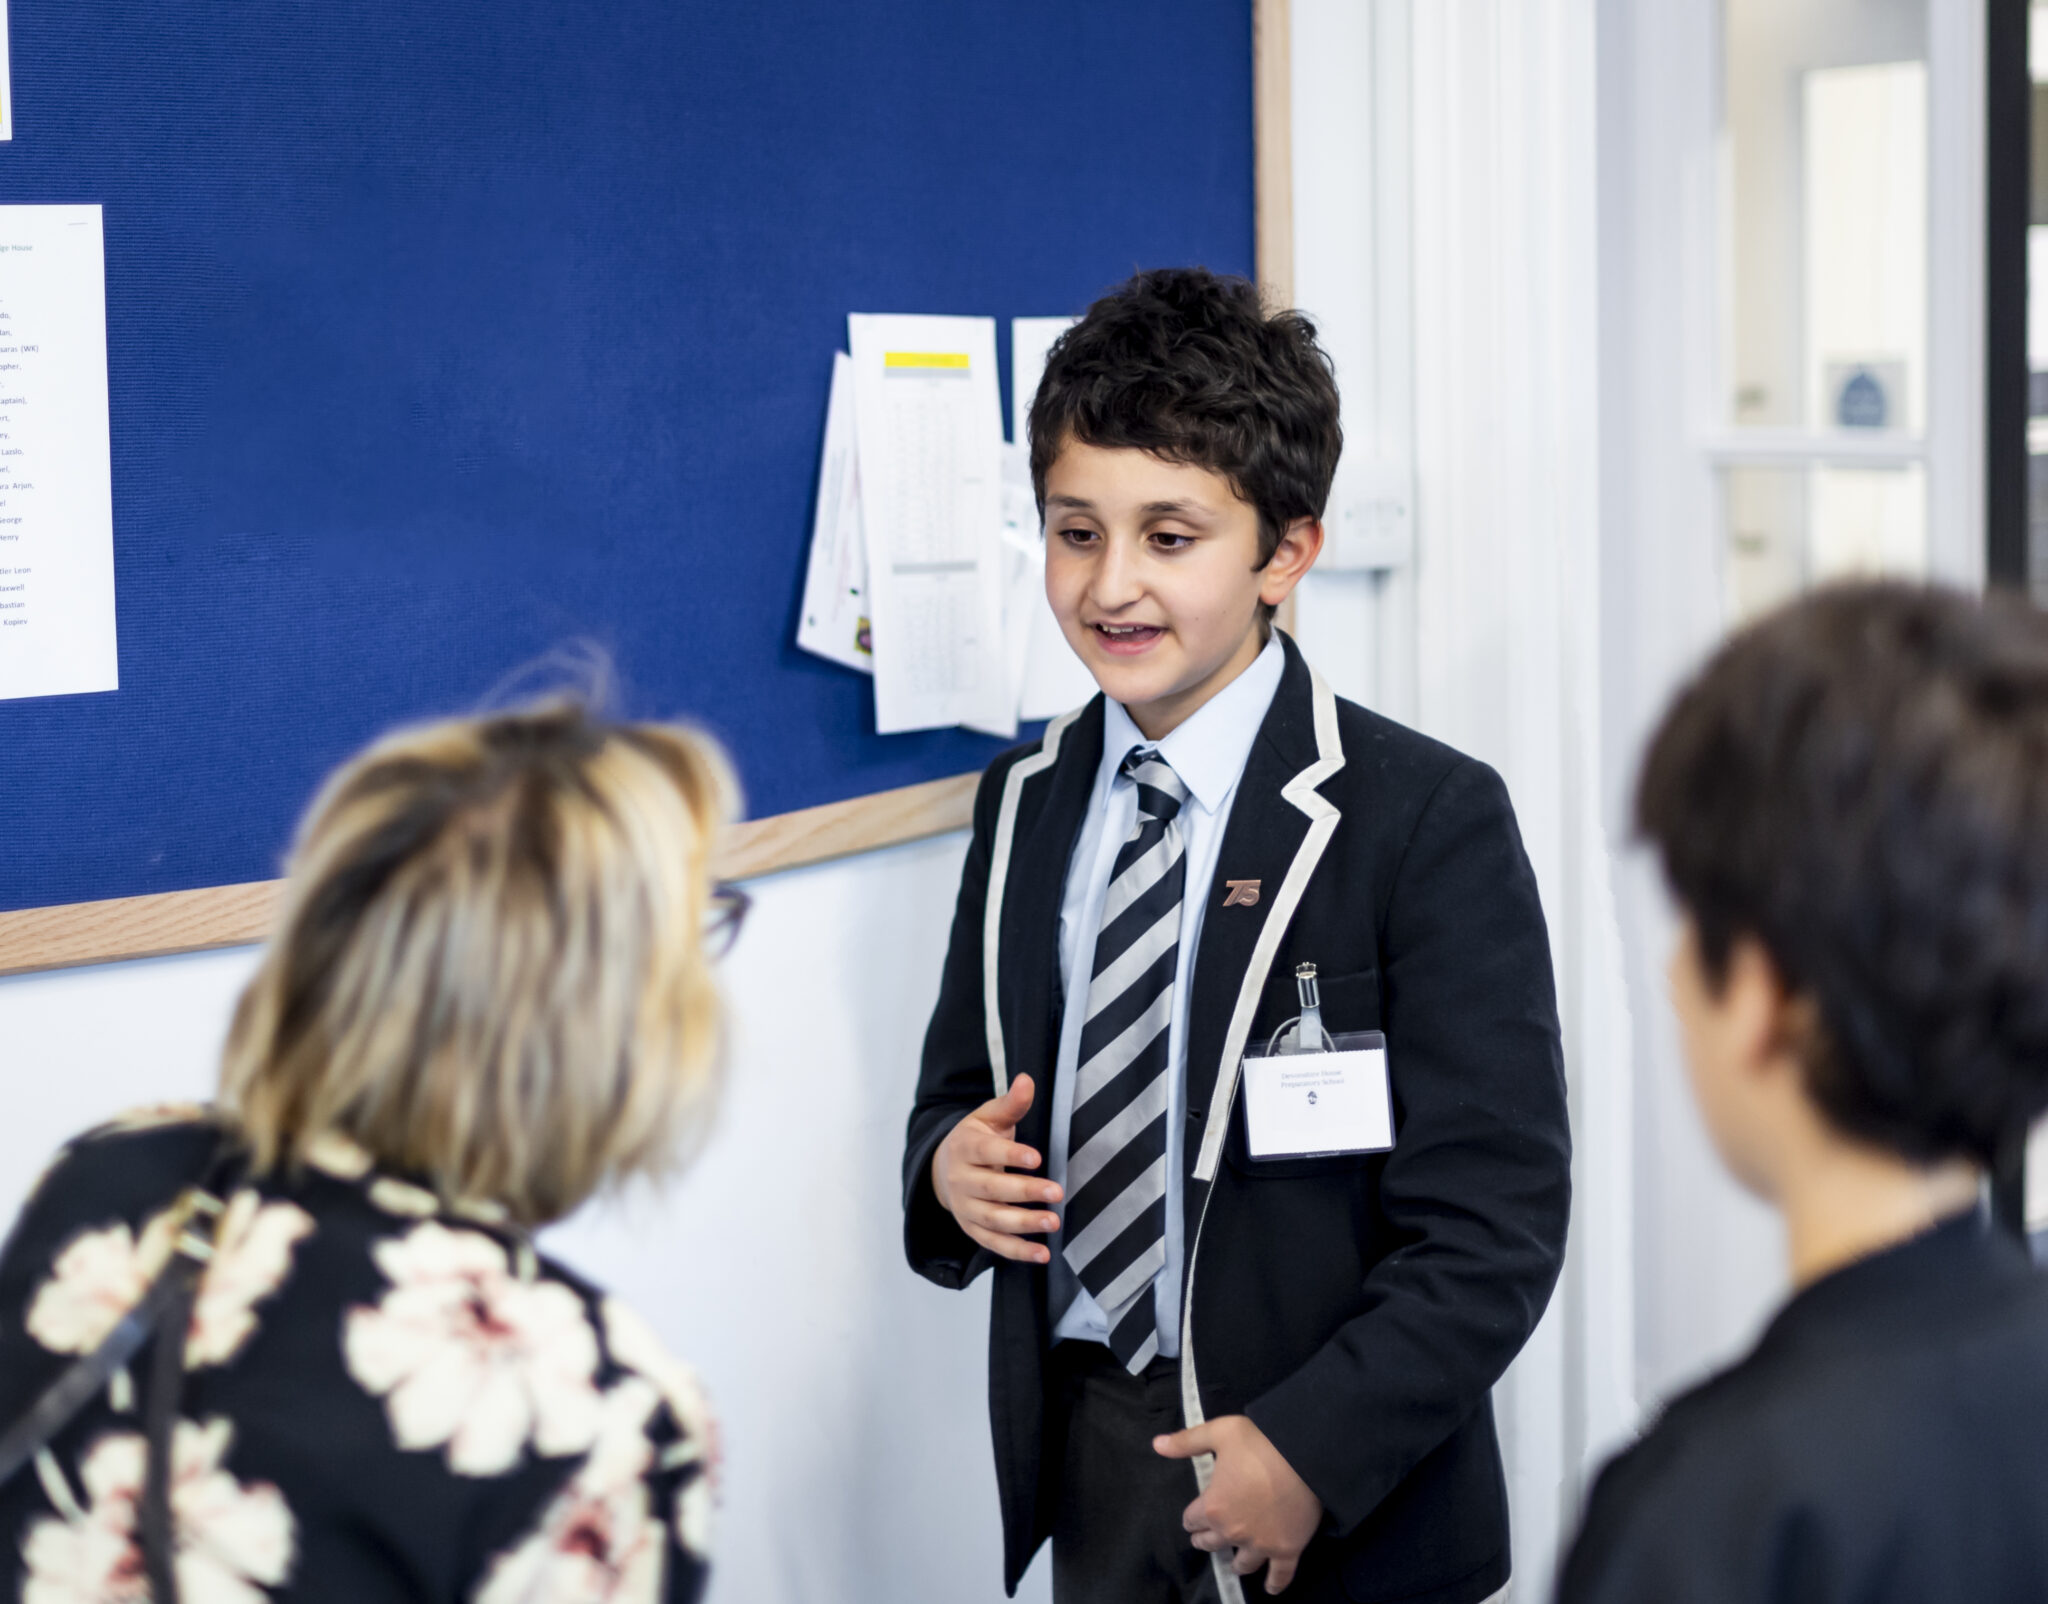 Devonshire House Open Morning's Tours being conducted by students from Year 6 to Year 8